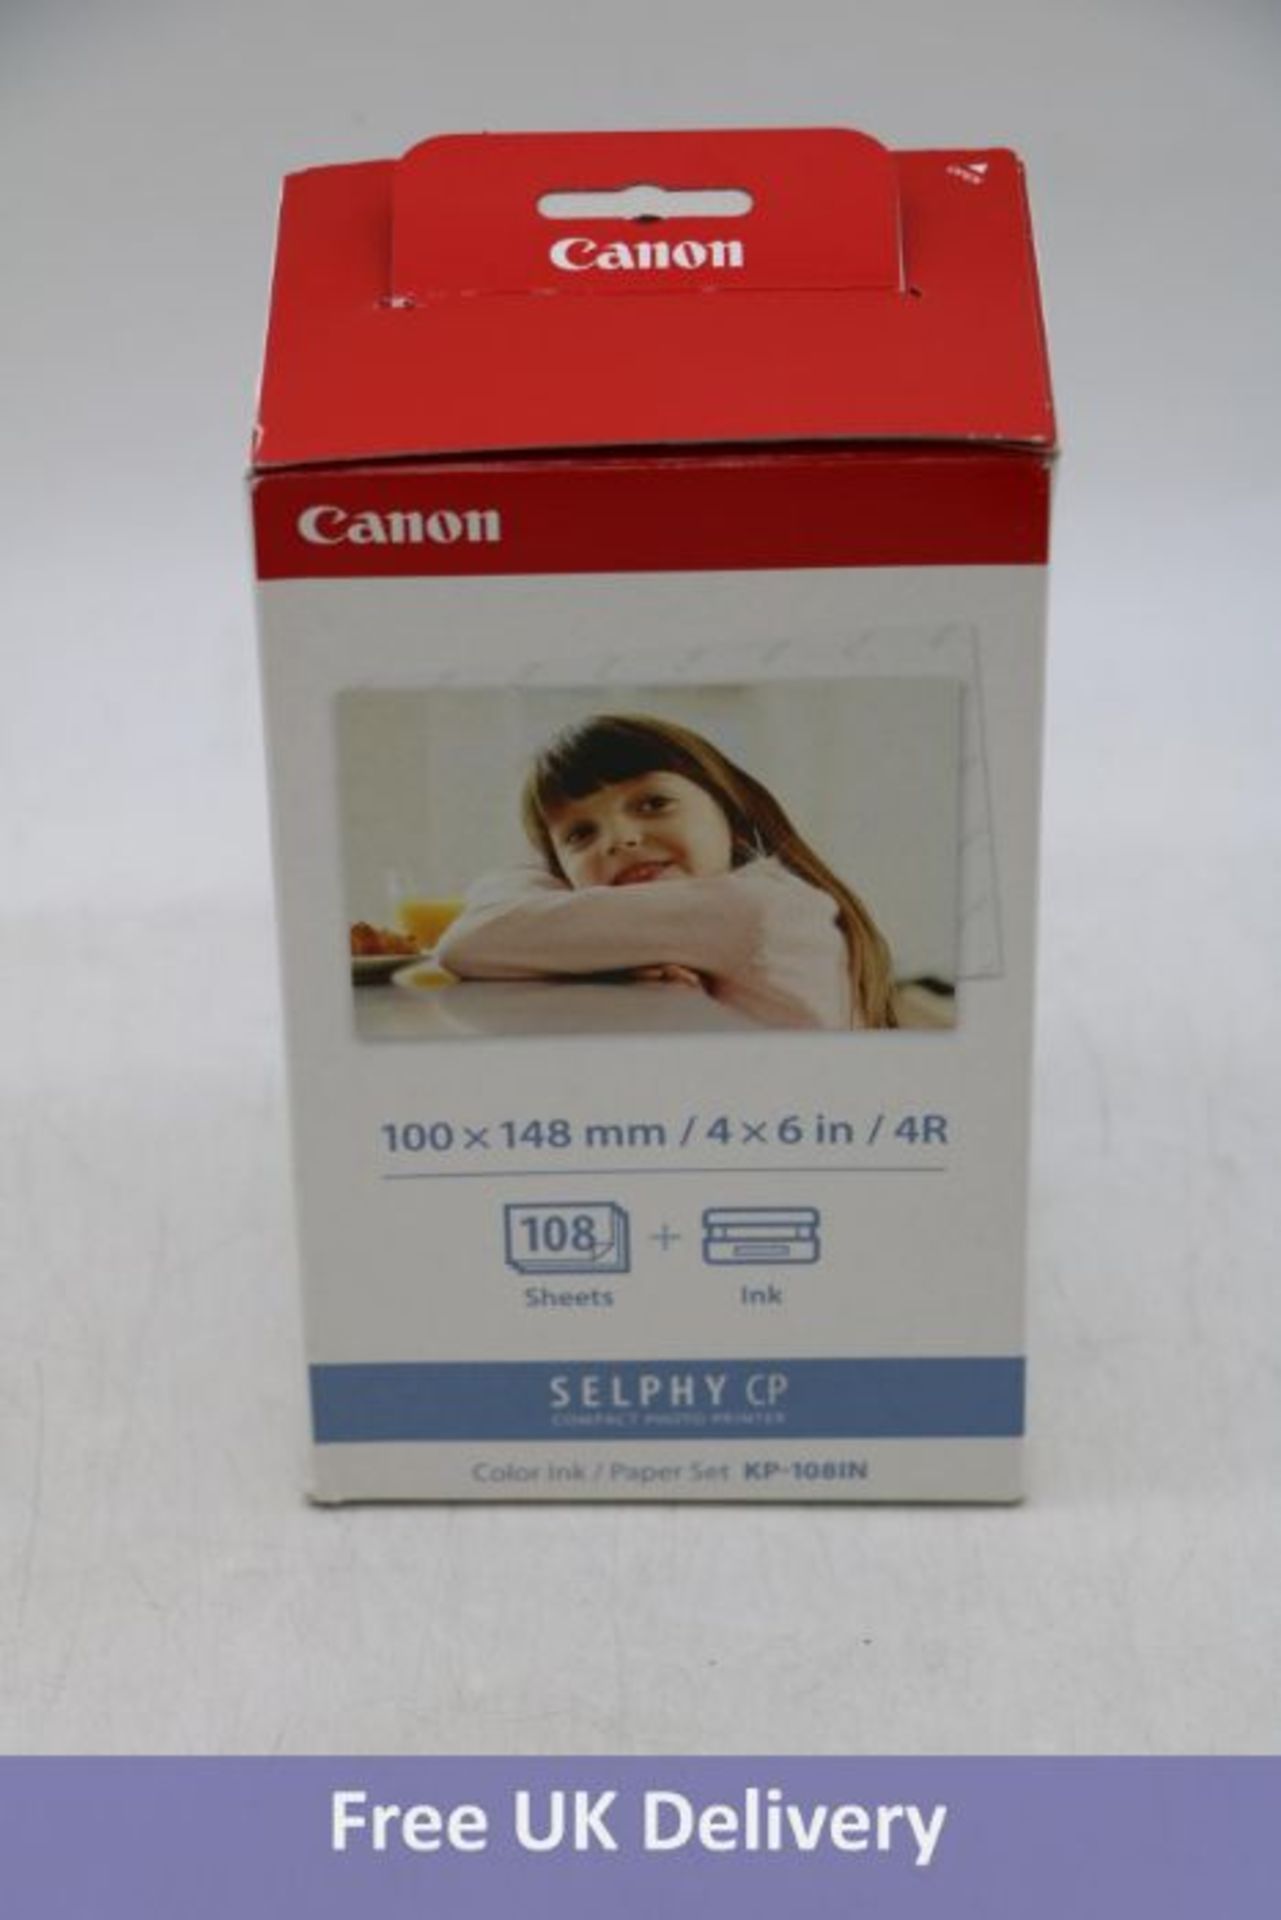 Two Canon KP-108IN Selphy CP Compact Photo Printer, 100 x 148 mm/4 x 6 in/ 4R